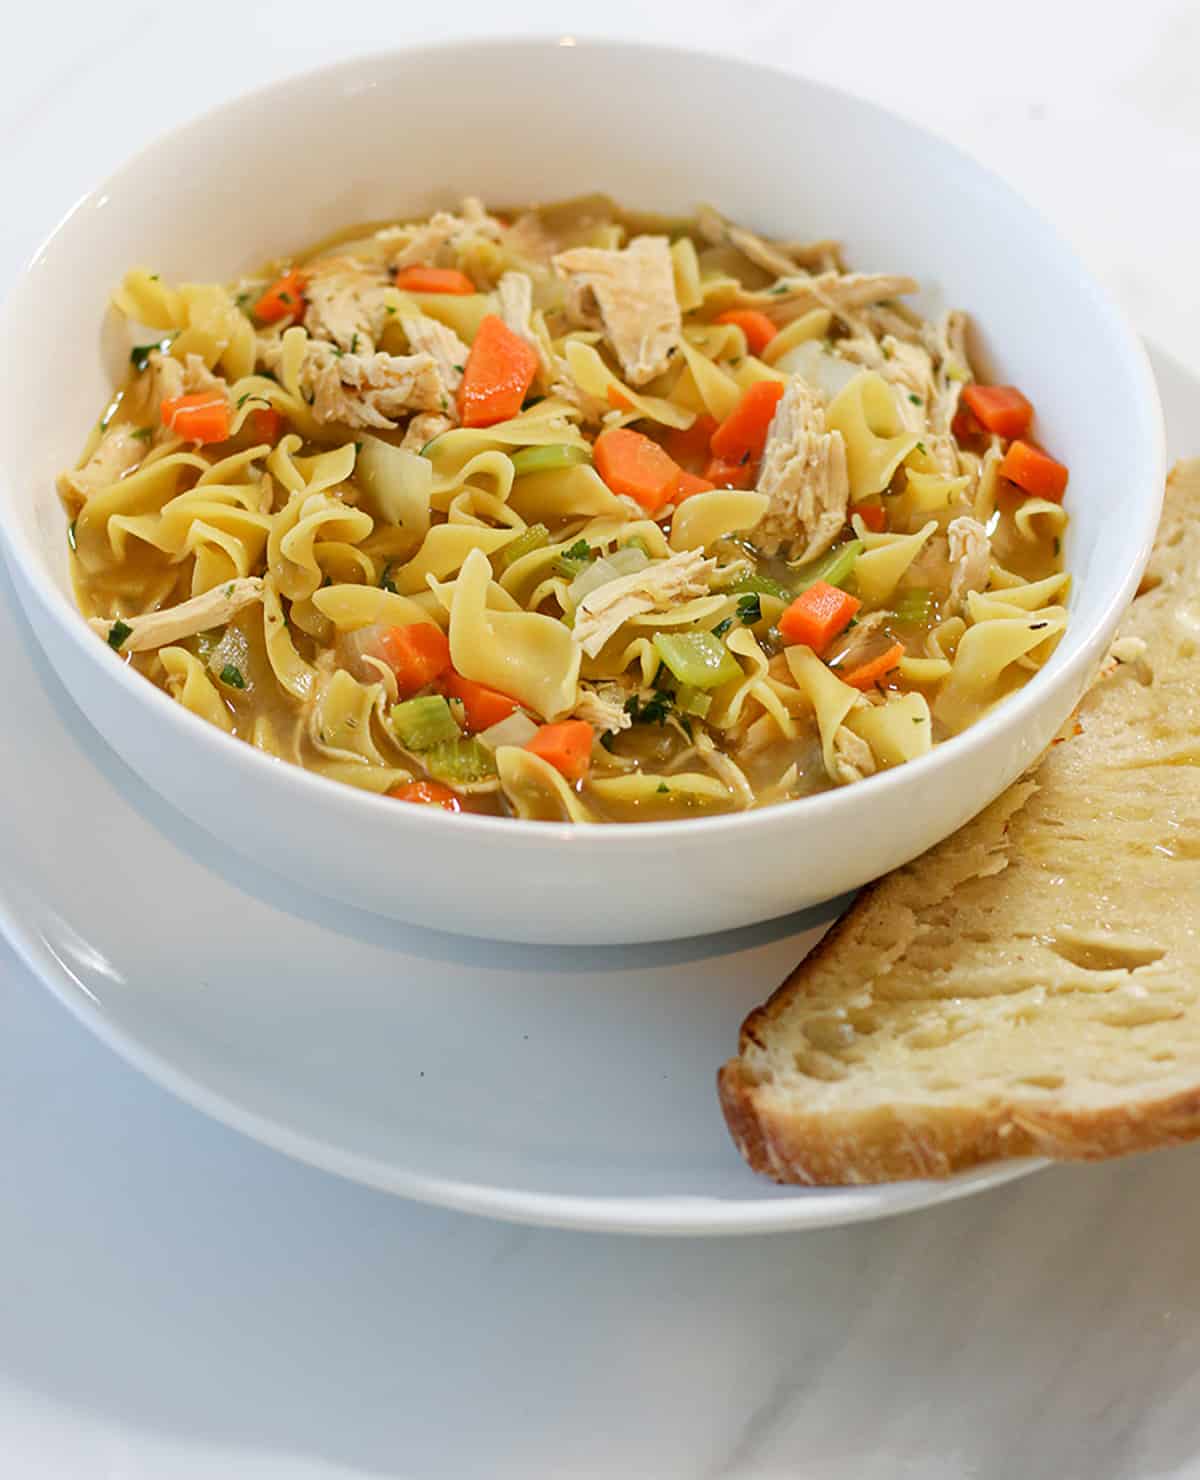 A white bowl with chicken noodle soup and side of sourdough bread.